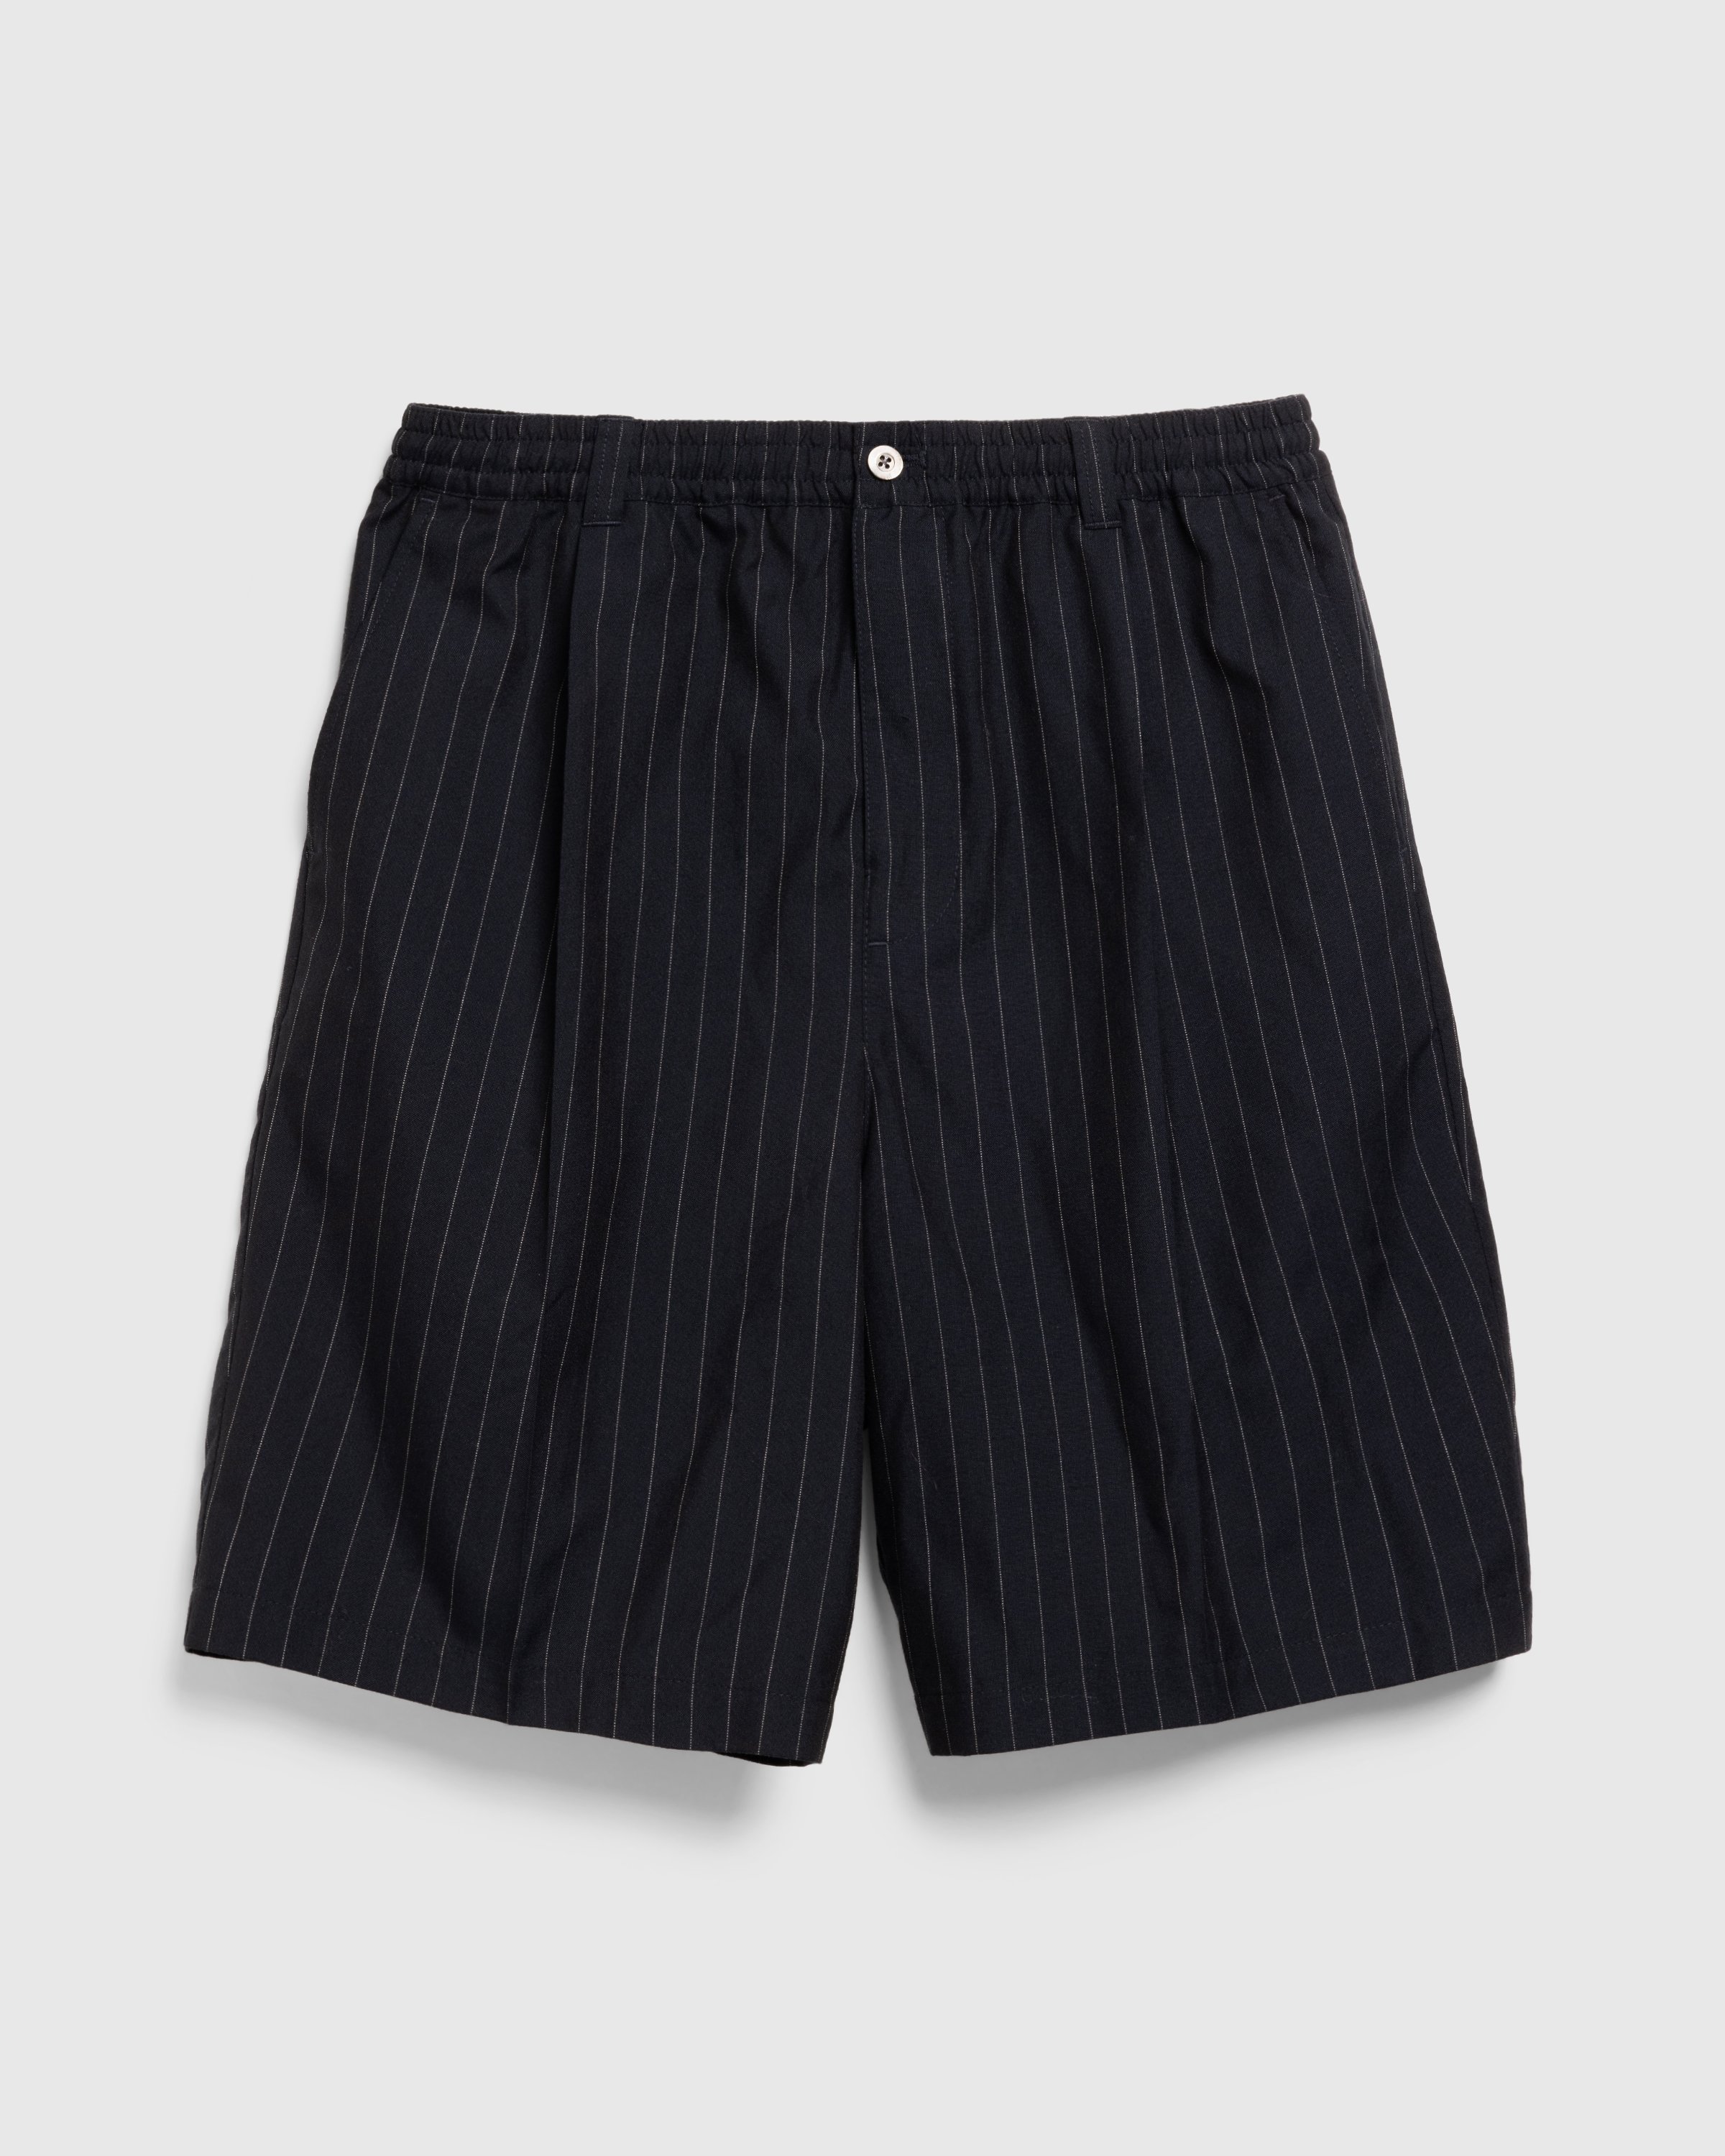 Highsnobiety HS05 - Tropical Suiting Shorts Stripes Navy - Clothing - Stripes Navy - Image 1